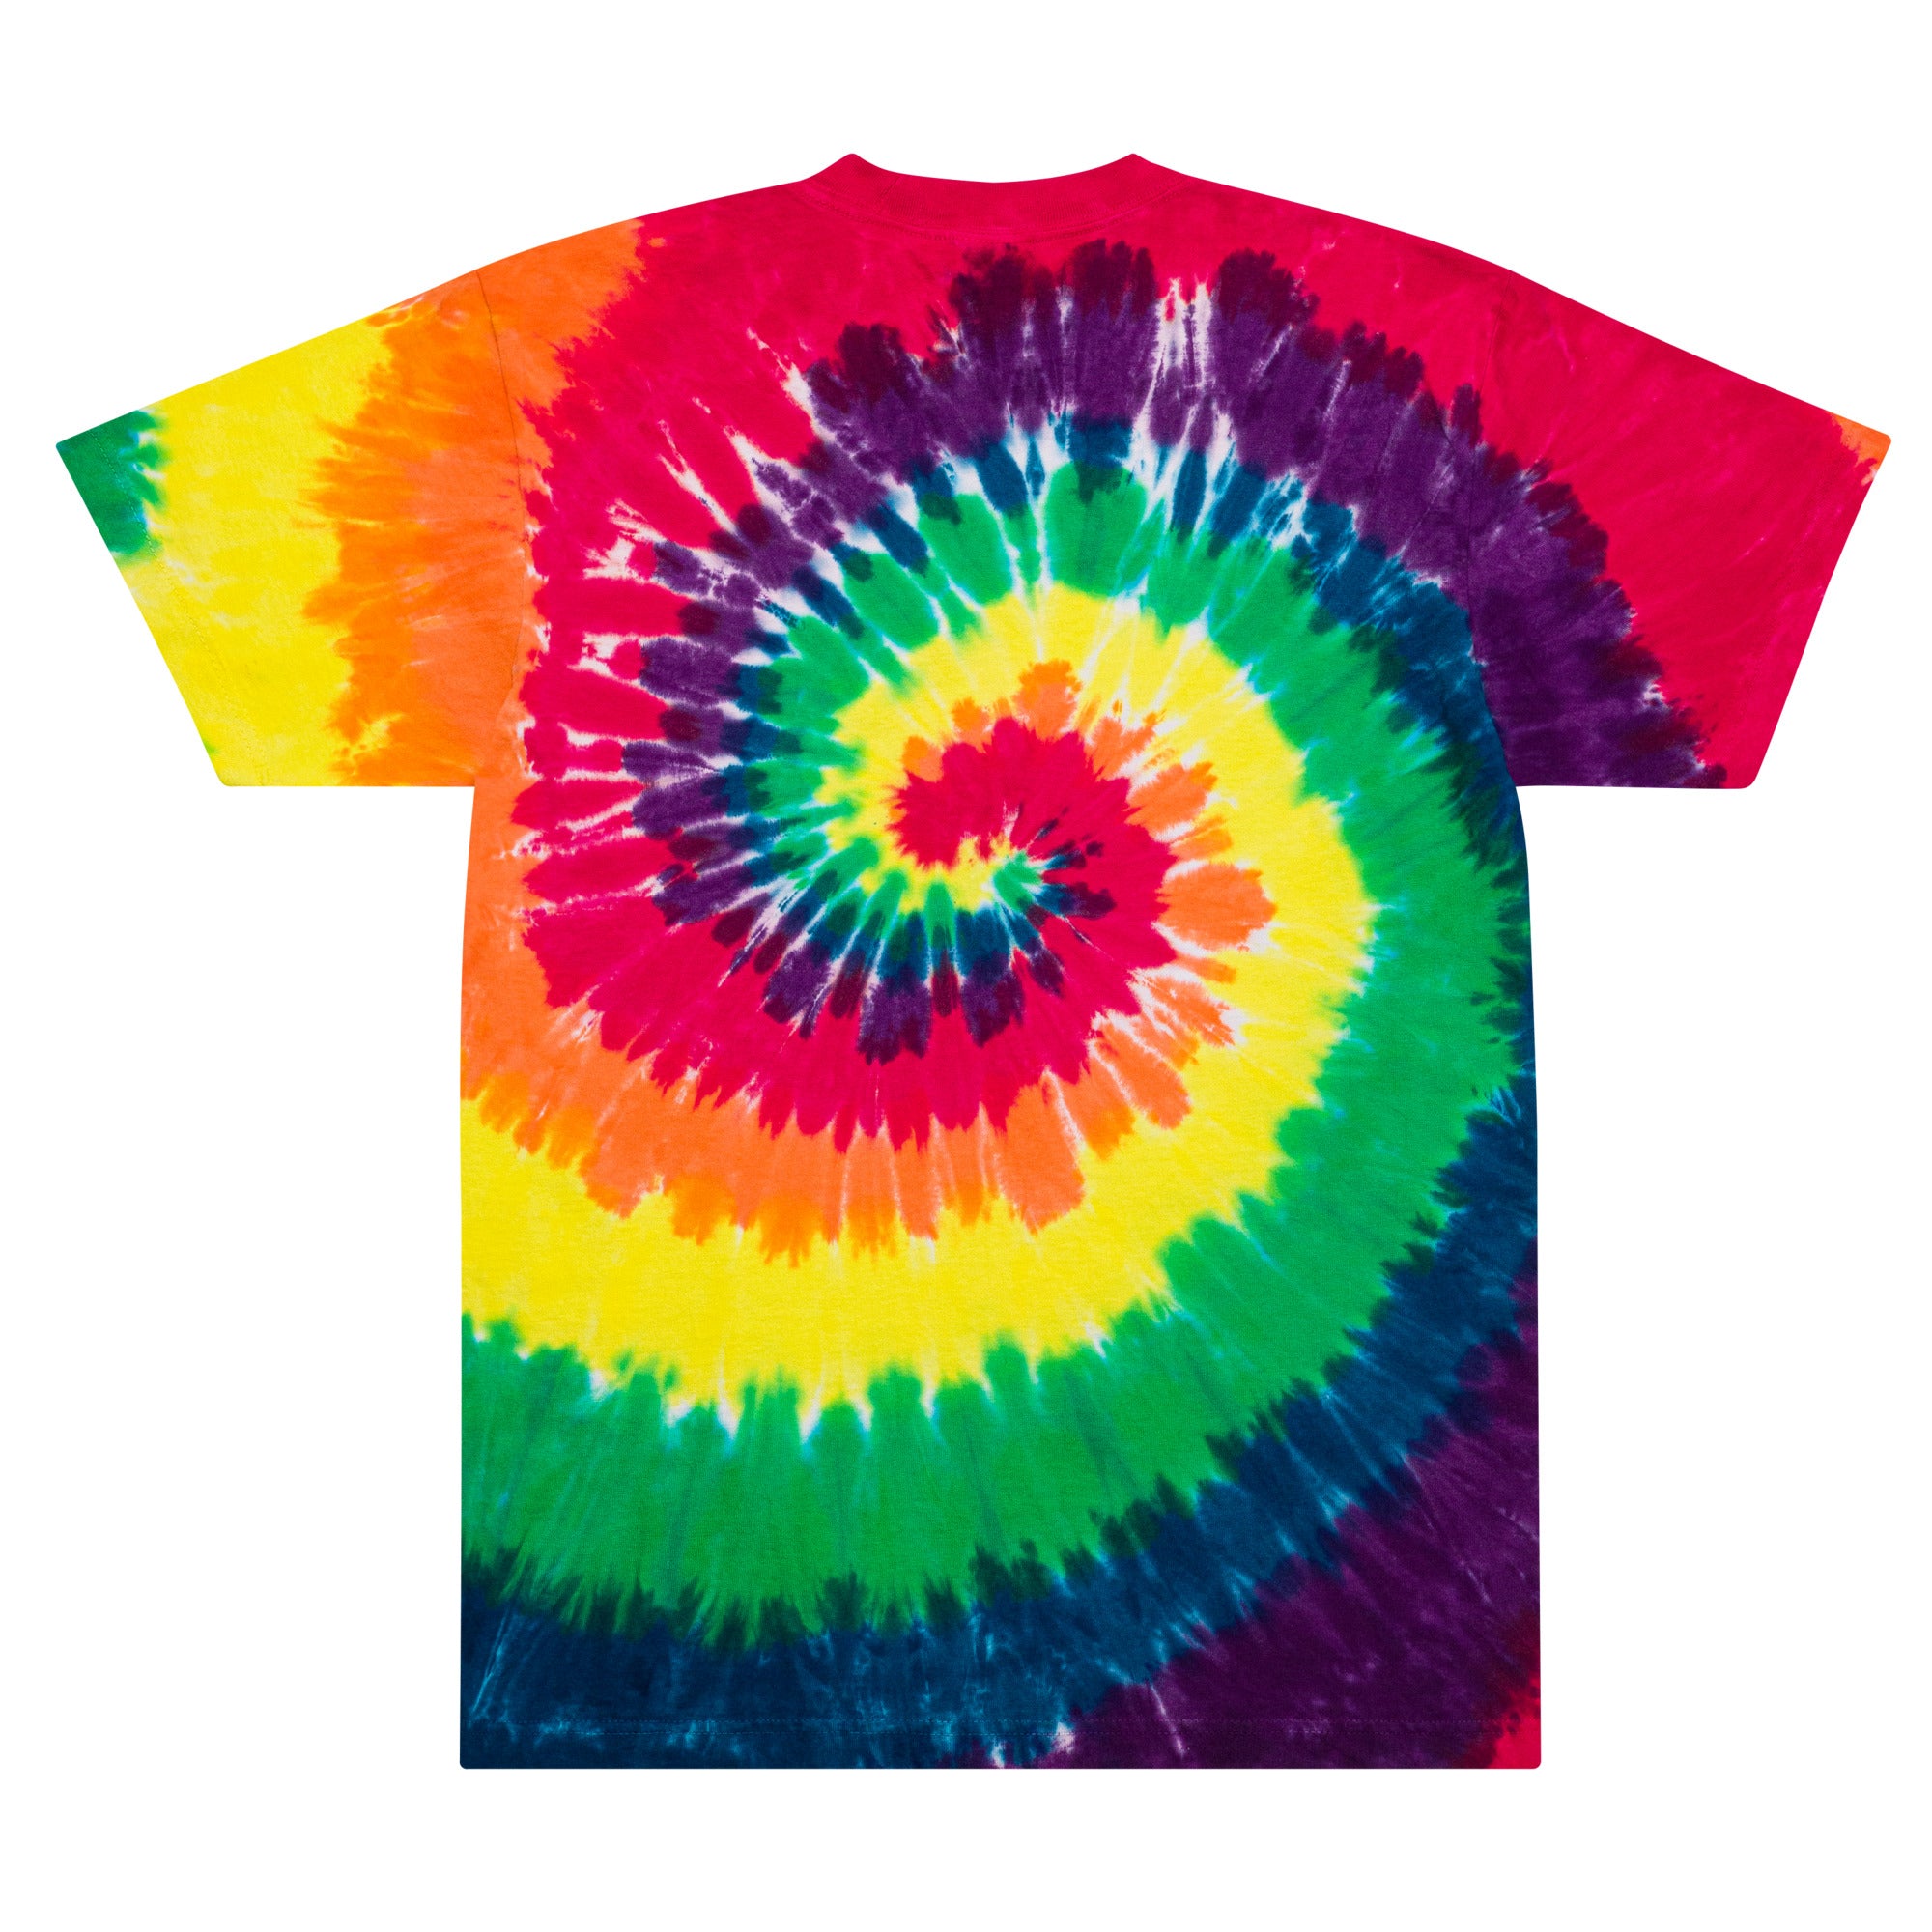 My AR-15 Identifies as a Bolt Action Rifle Oversized Tie-dye Embroidered T-shirt